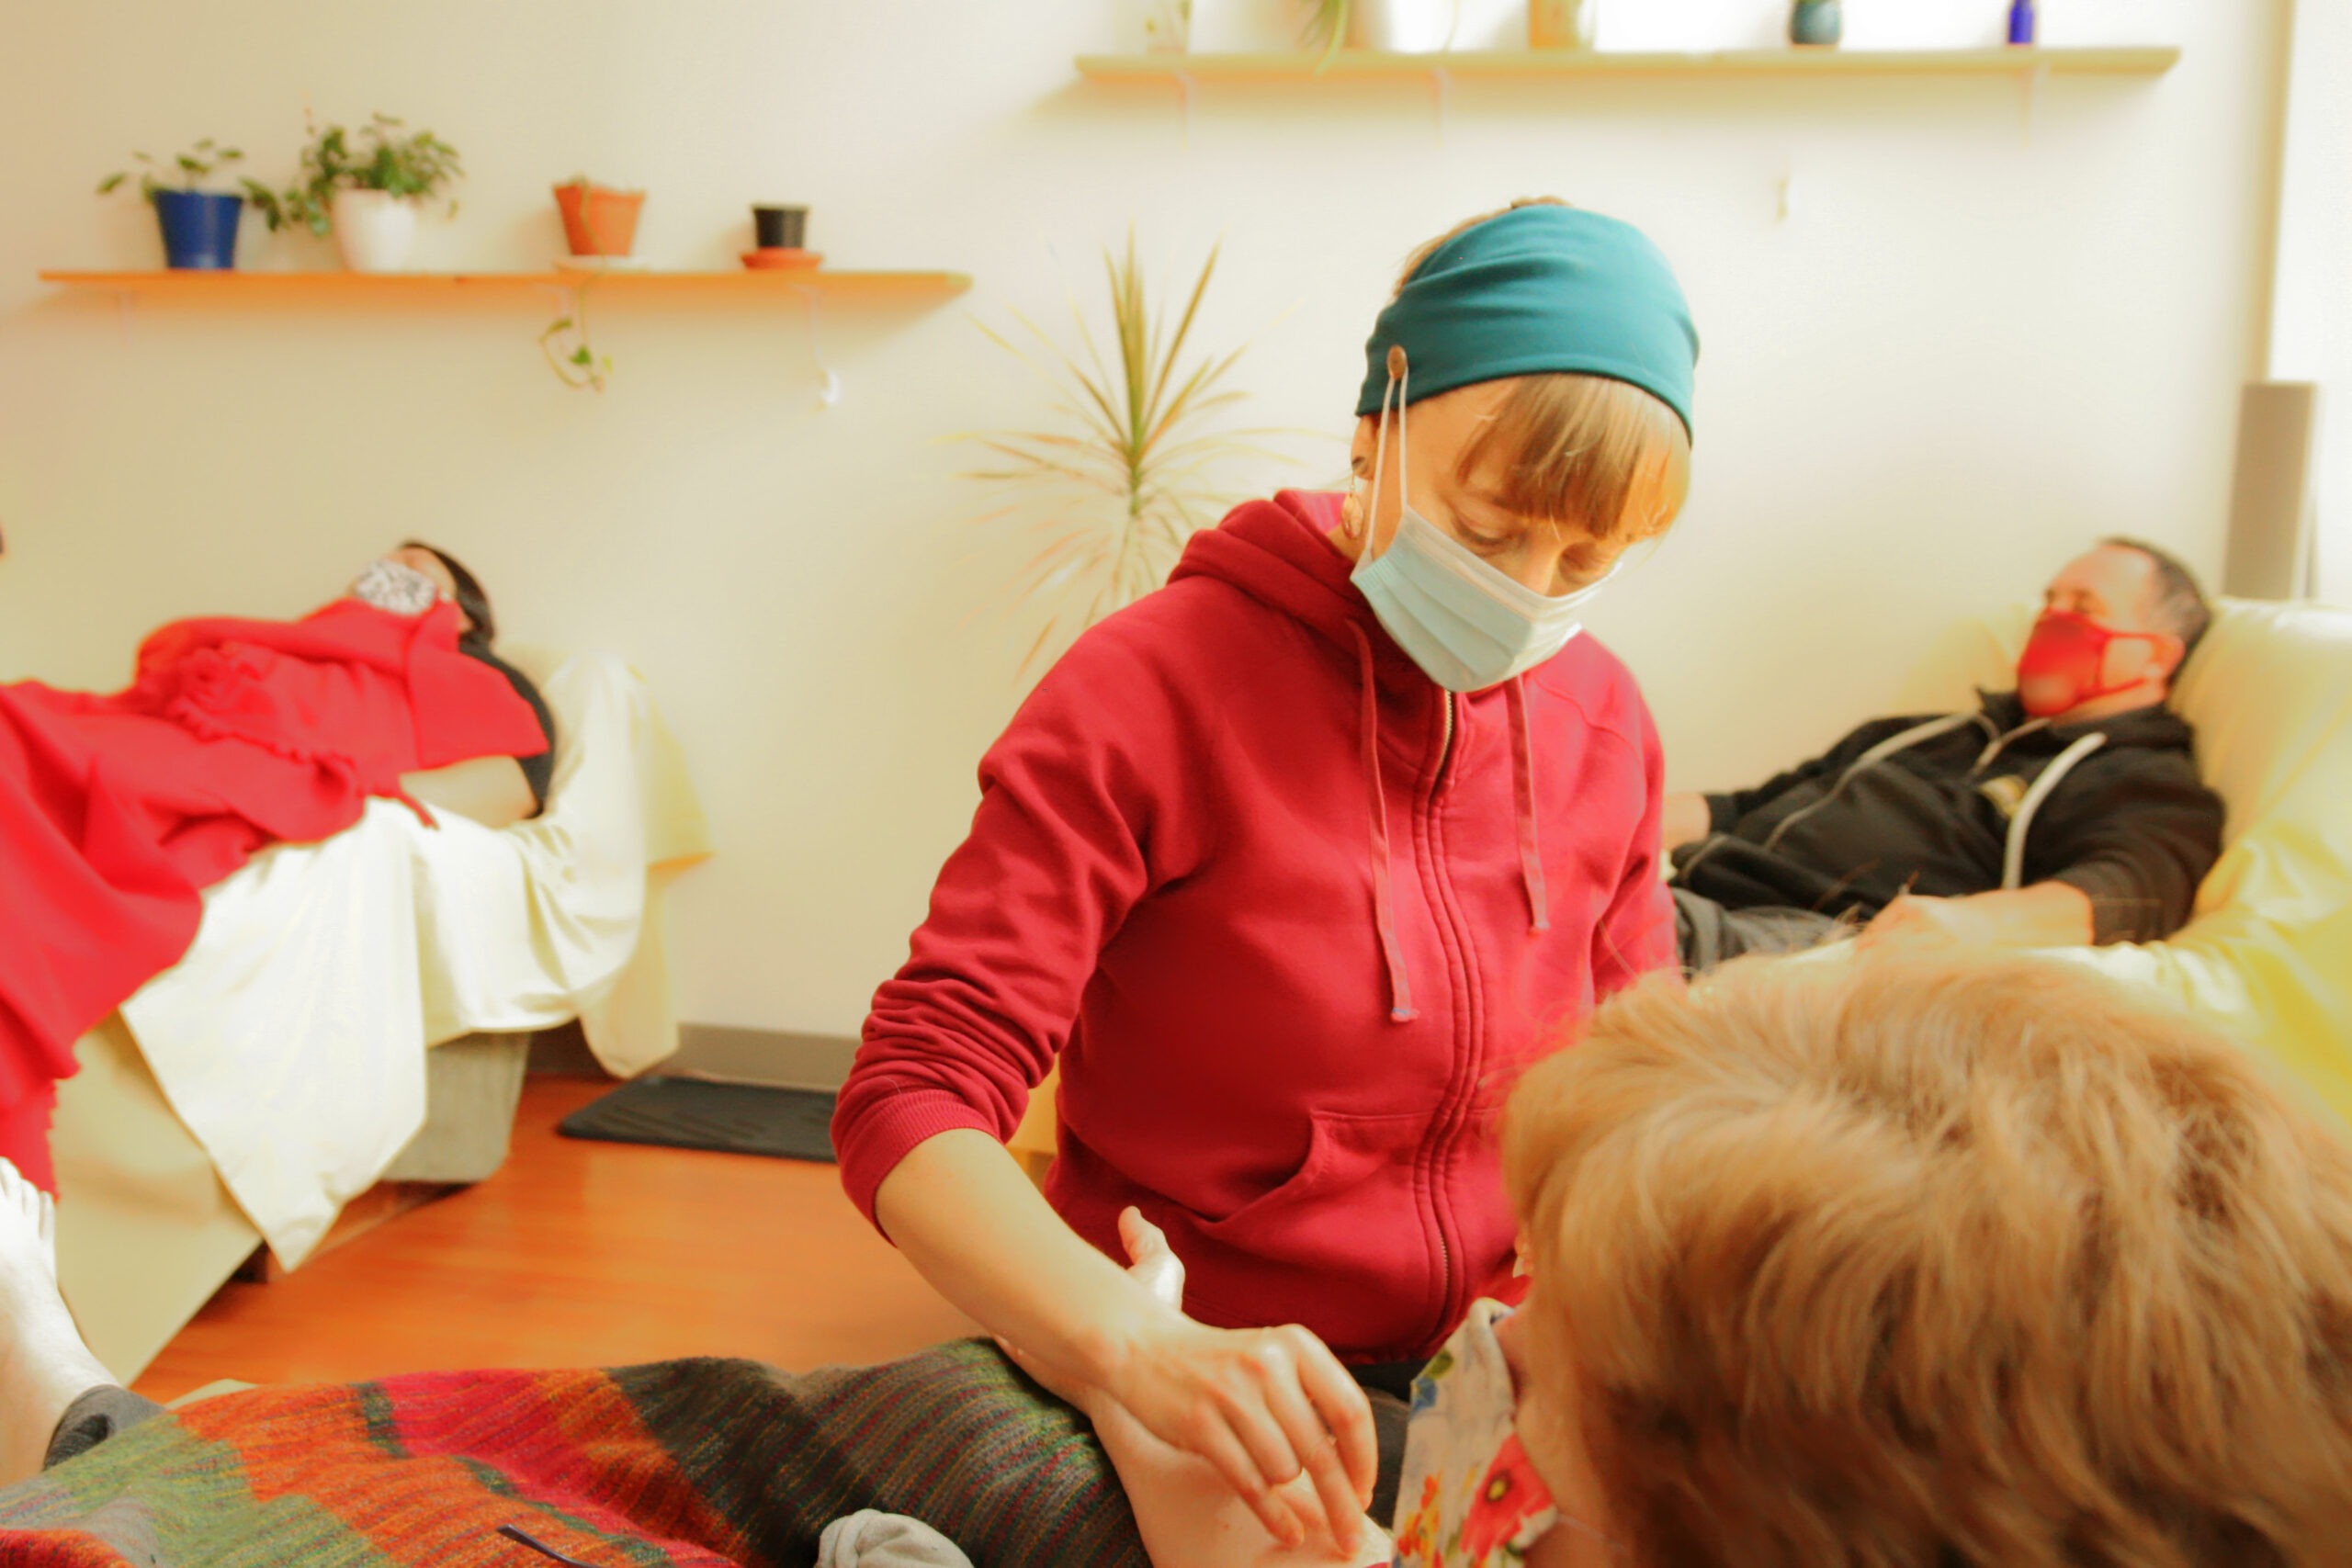 A person in a surgical mask and a red hoodie sets needles into someone's arm. Visible in the background are two other masked patients with closed eyes and two shelves on the wall holding plants.